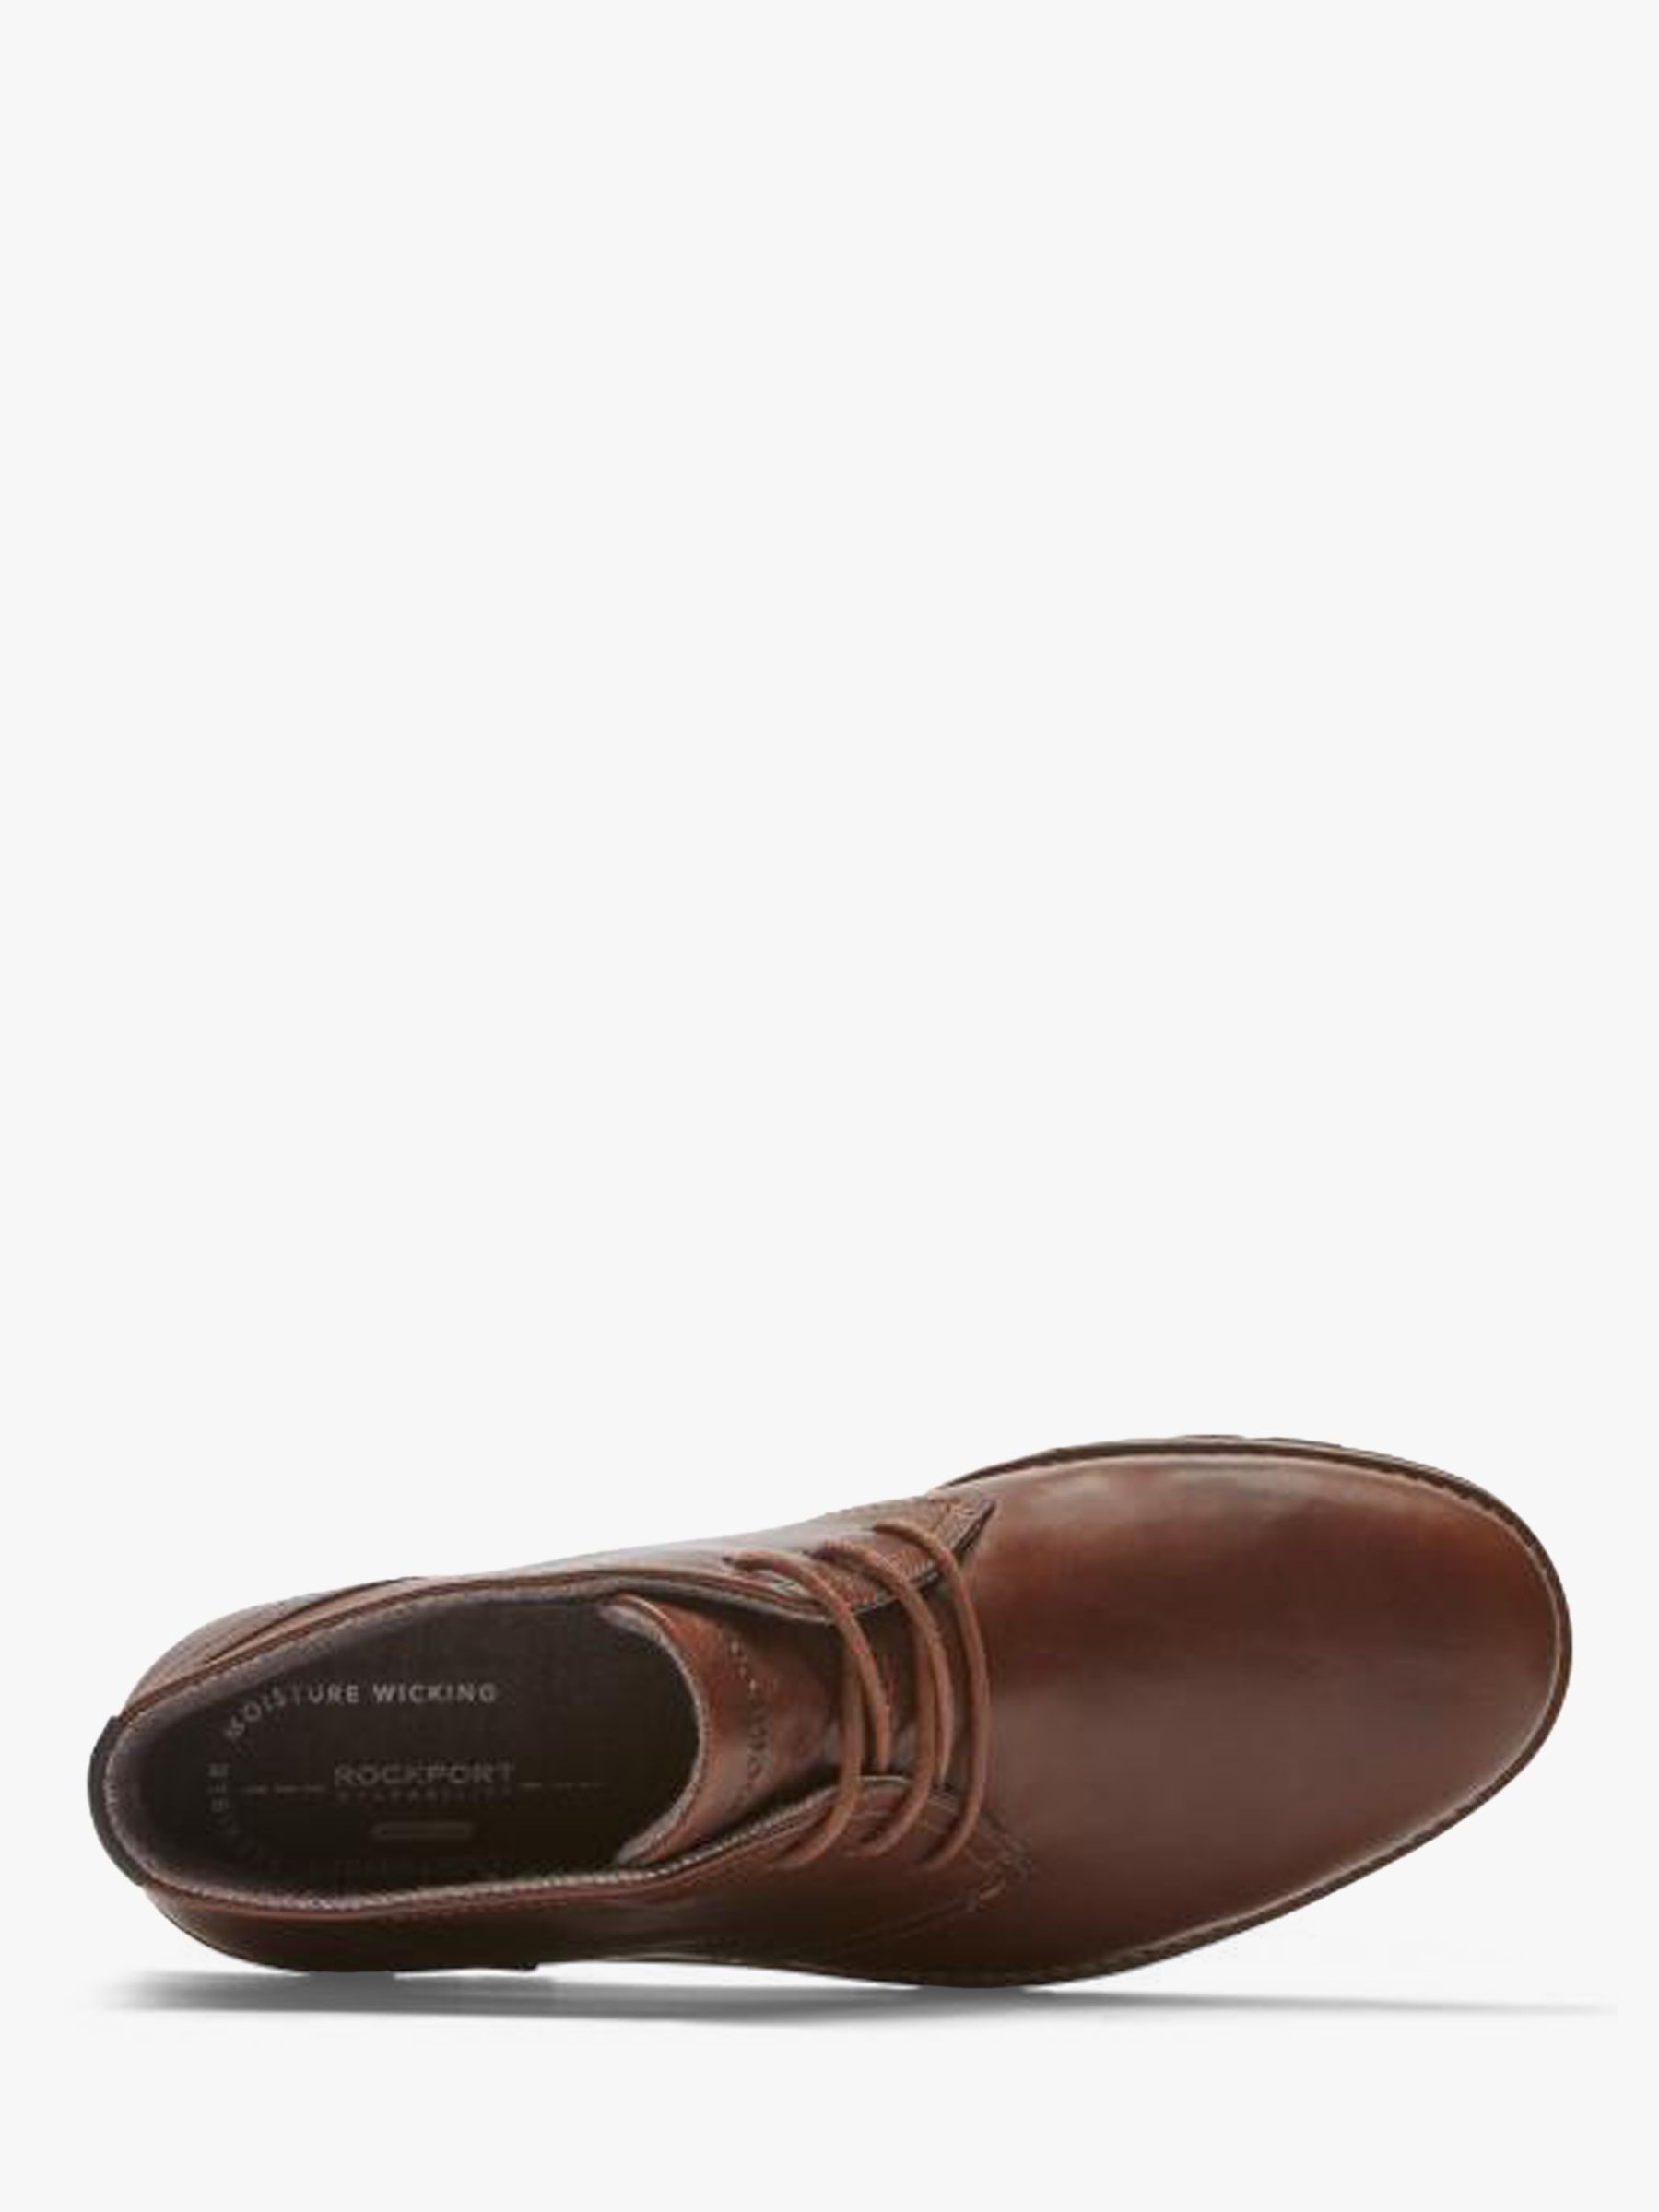 rockport tailoring guide chukka boots